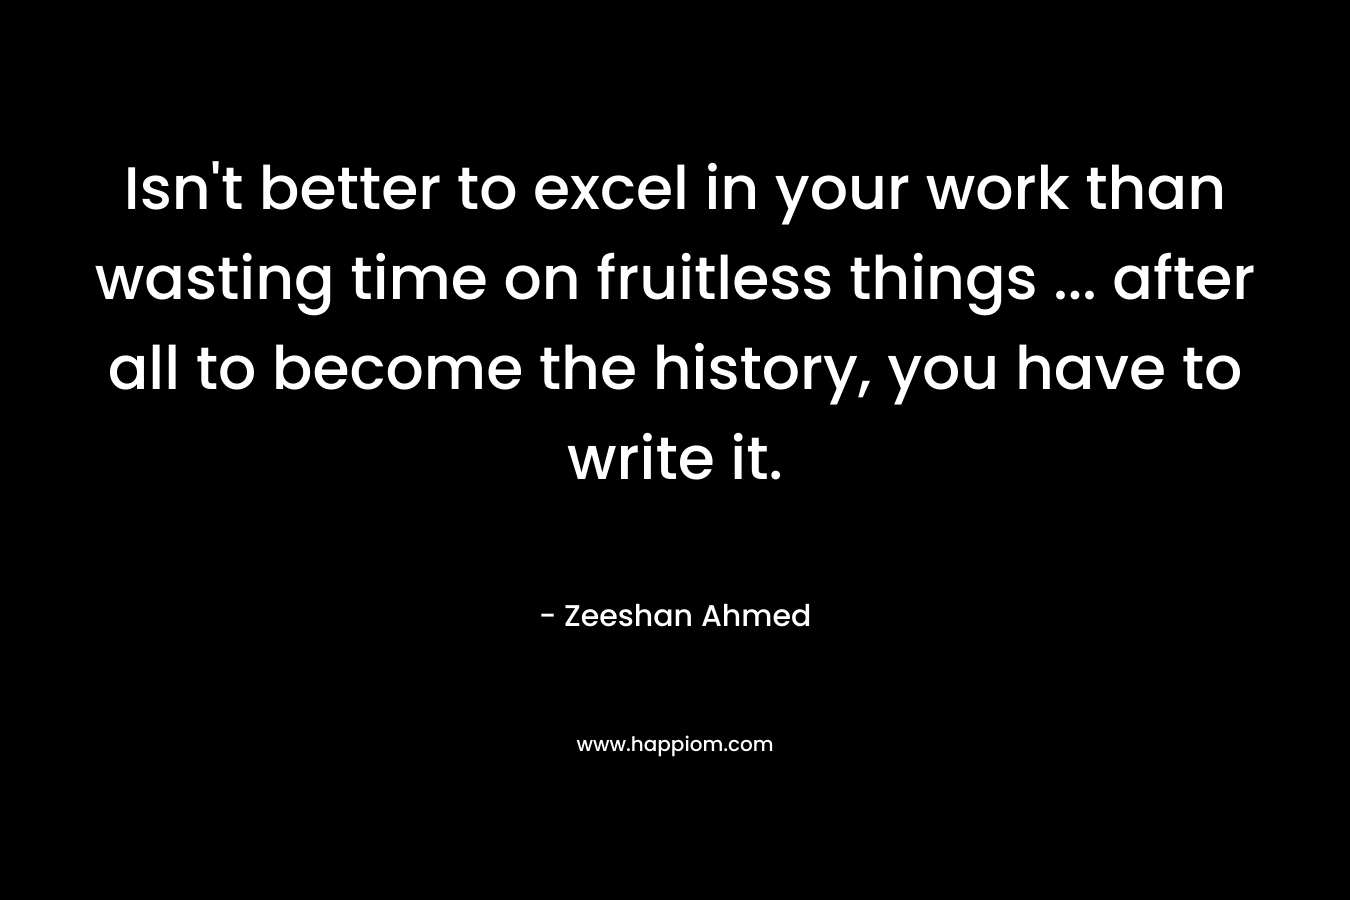 Isn't better to excel in your work than wasting time on fruitless things ... after all to become the history, you have to write it.